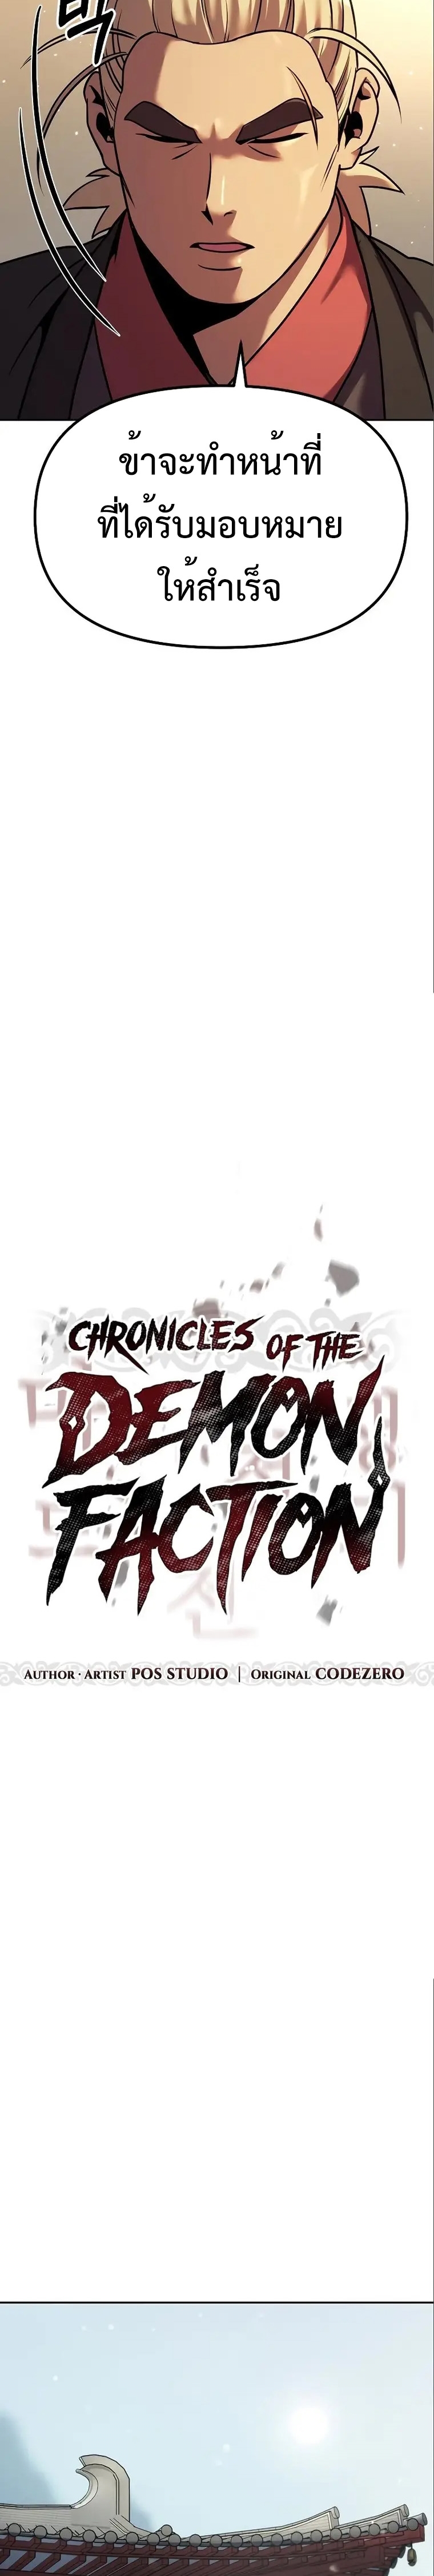 Chronicles of the Demon Faction 36 (4)